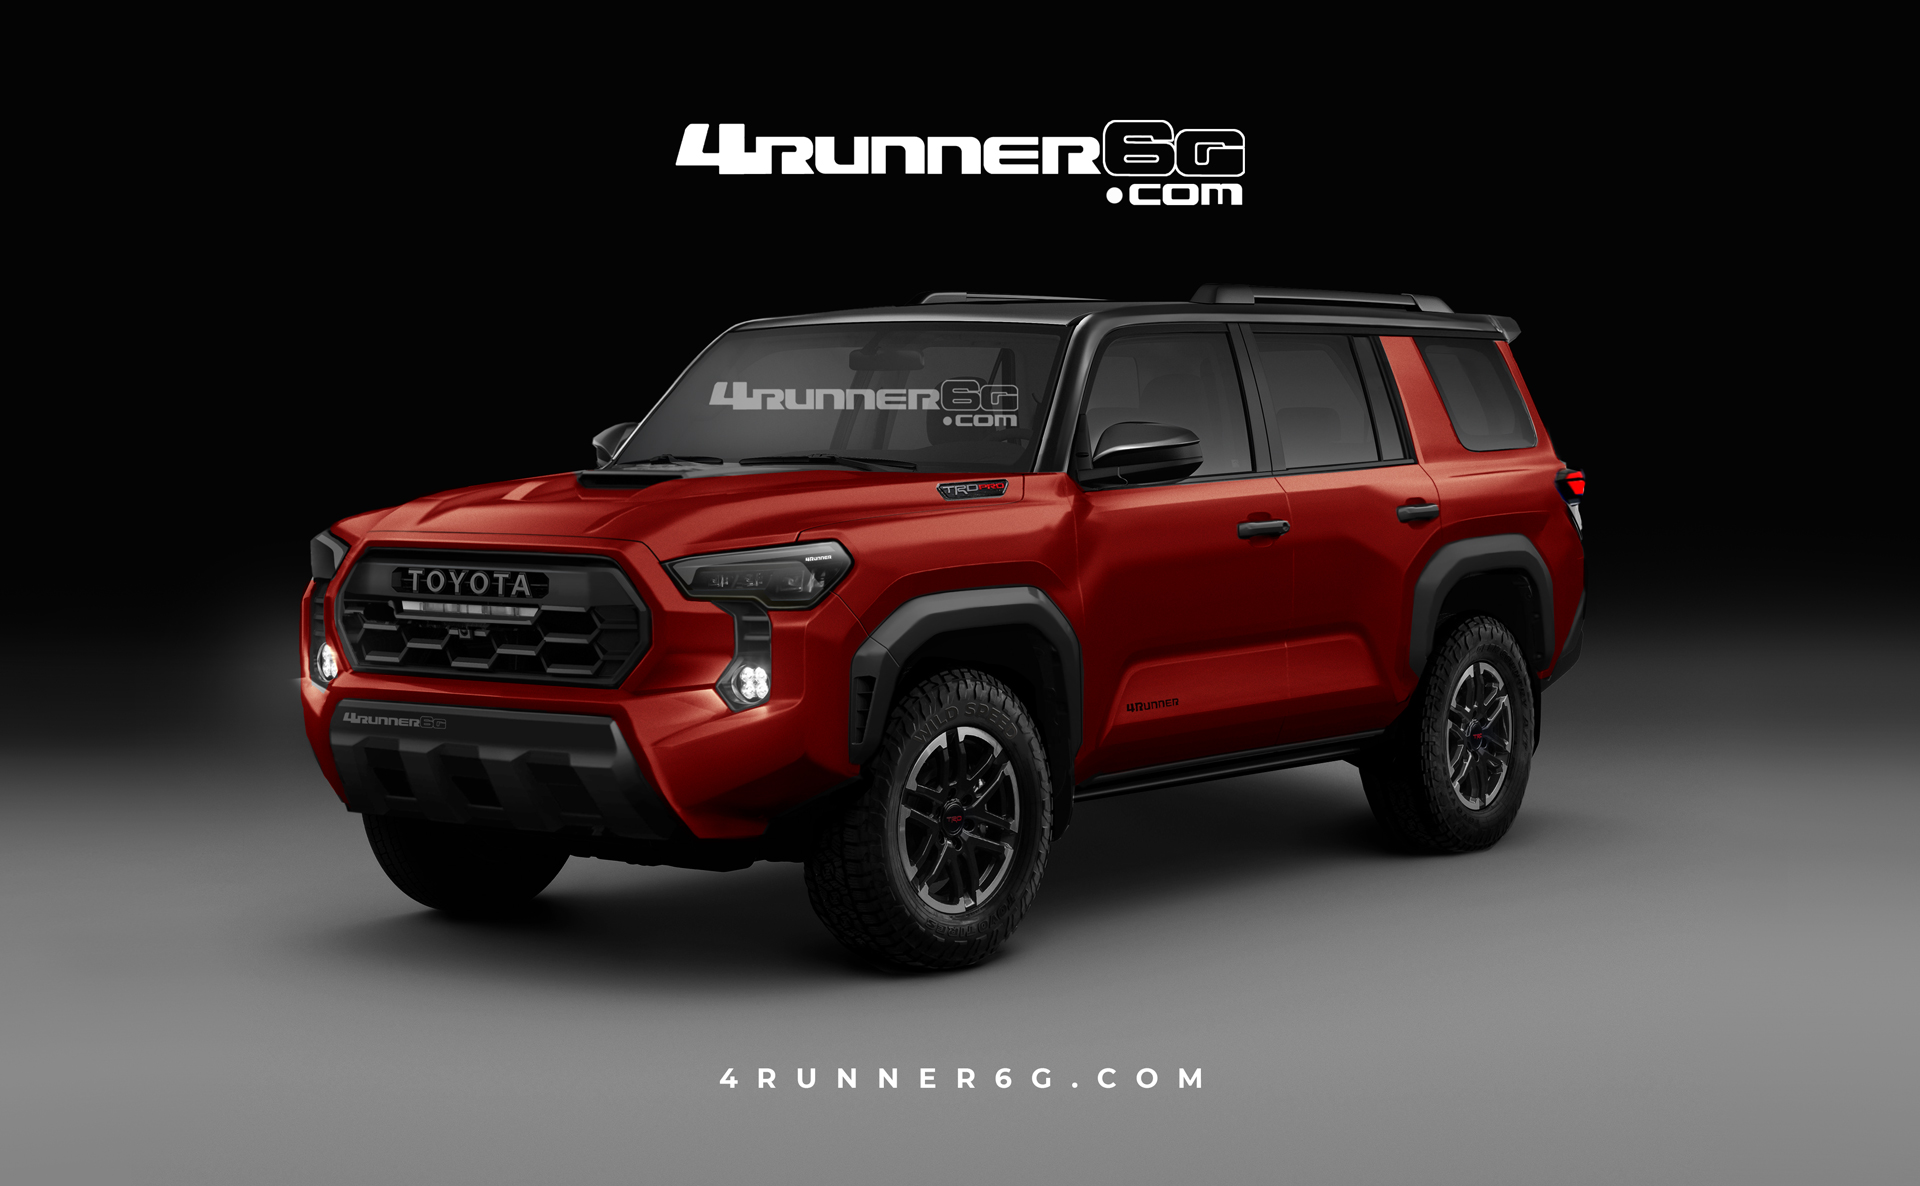 2025 Toyota 4runner 2025 4Runner (6th Gen) News, Specs, Engines, Release Date, Production Date & Preview Renderings -- Insider Info (as of 7/30/23) 2025 Toyota-4Runner-Front-S-B_red